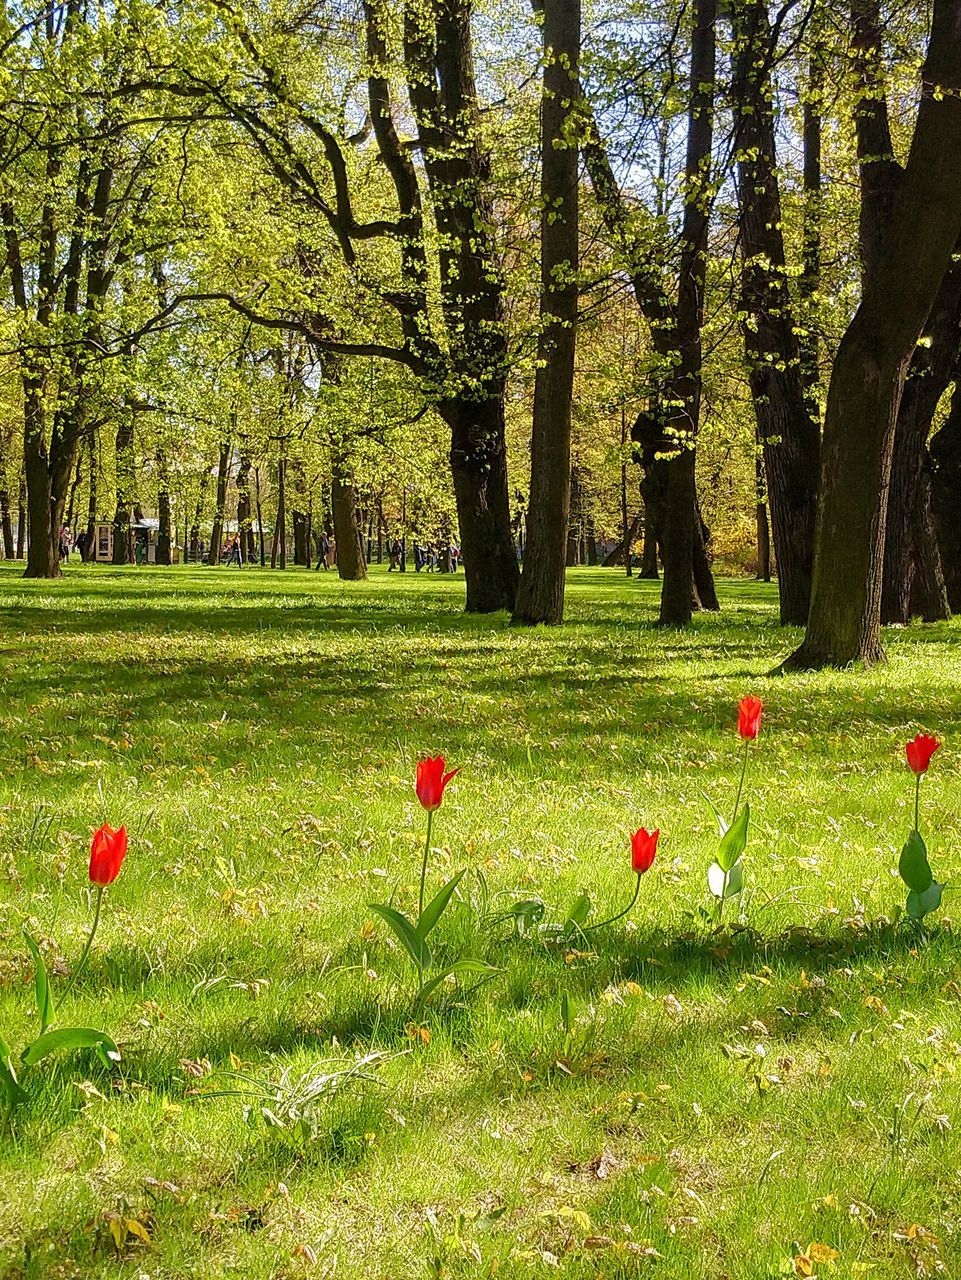 May Day Sunlight Green Color Green Grass 🌱 Tulips Red Tulips Trees Young Foliage Branches Idilic Scenics - Nature Shadows Plant Life EyeEm Nature Lover Nature Beauty In Nature EyeEm Gallery Eye4photography  EyeEm Selects